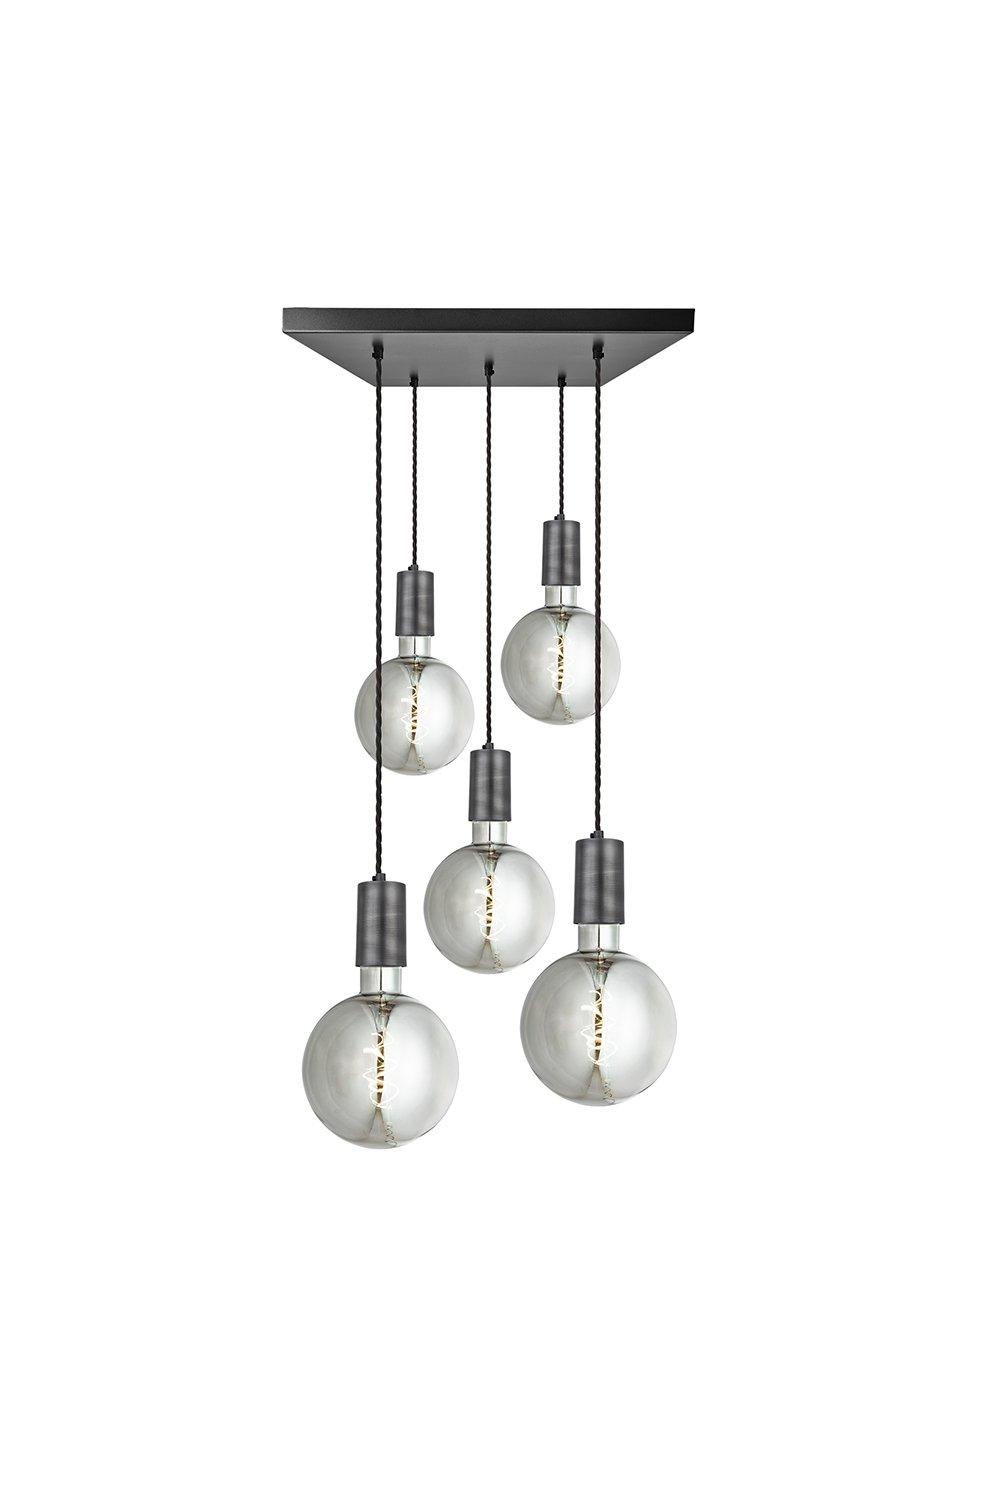 Sleek Large Edison Square Cluster Lights, 5 Wire - Pewter